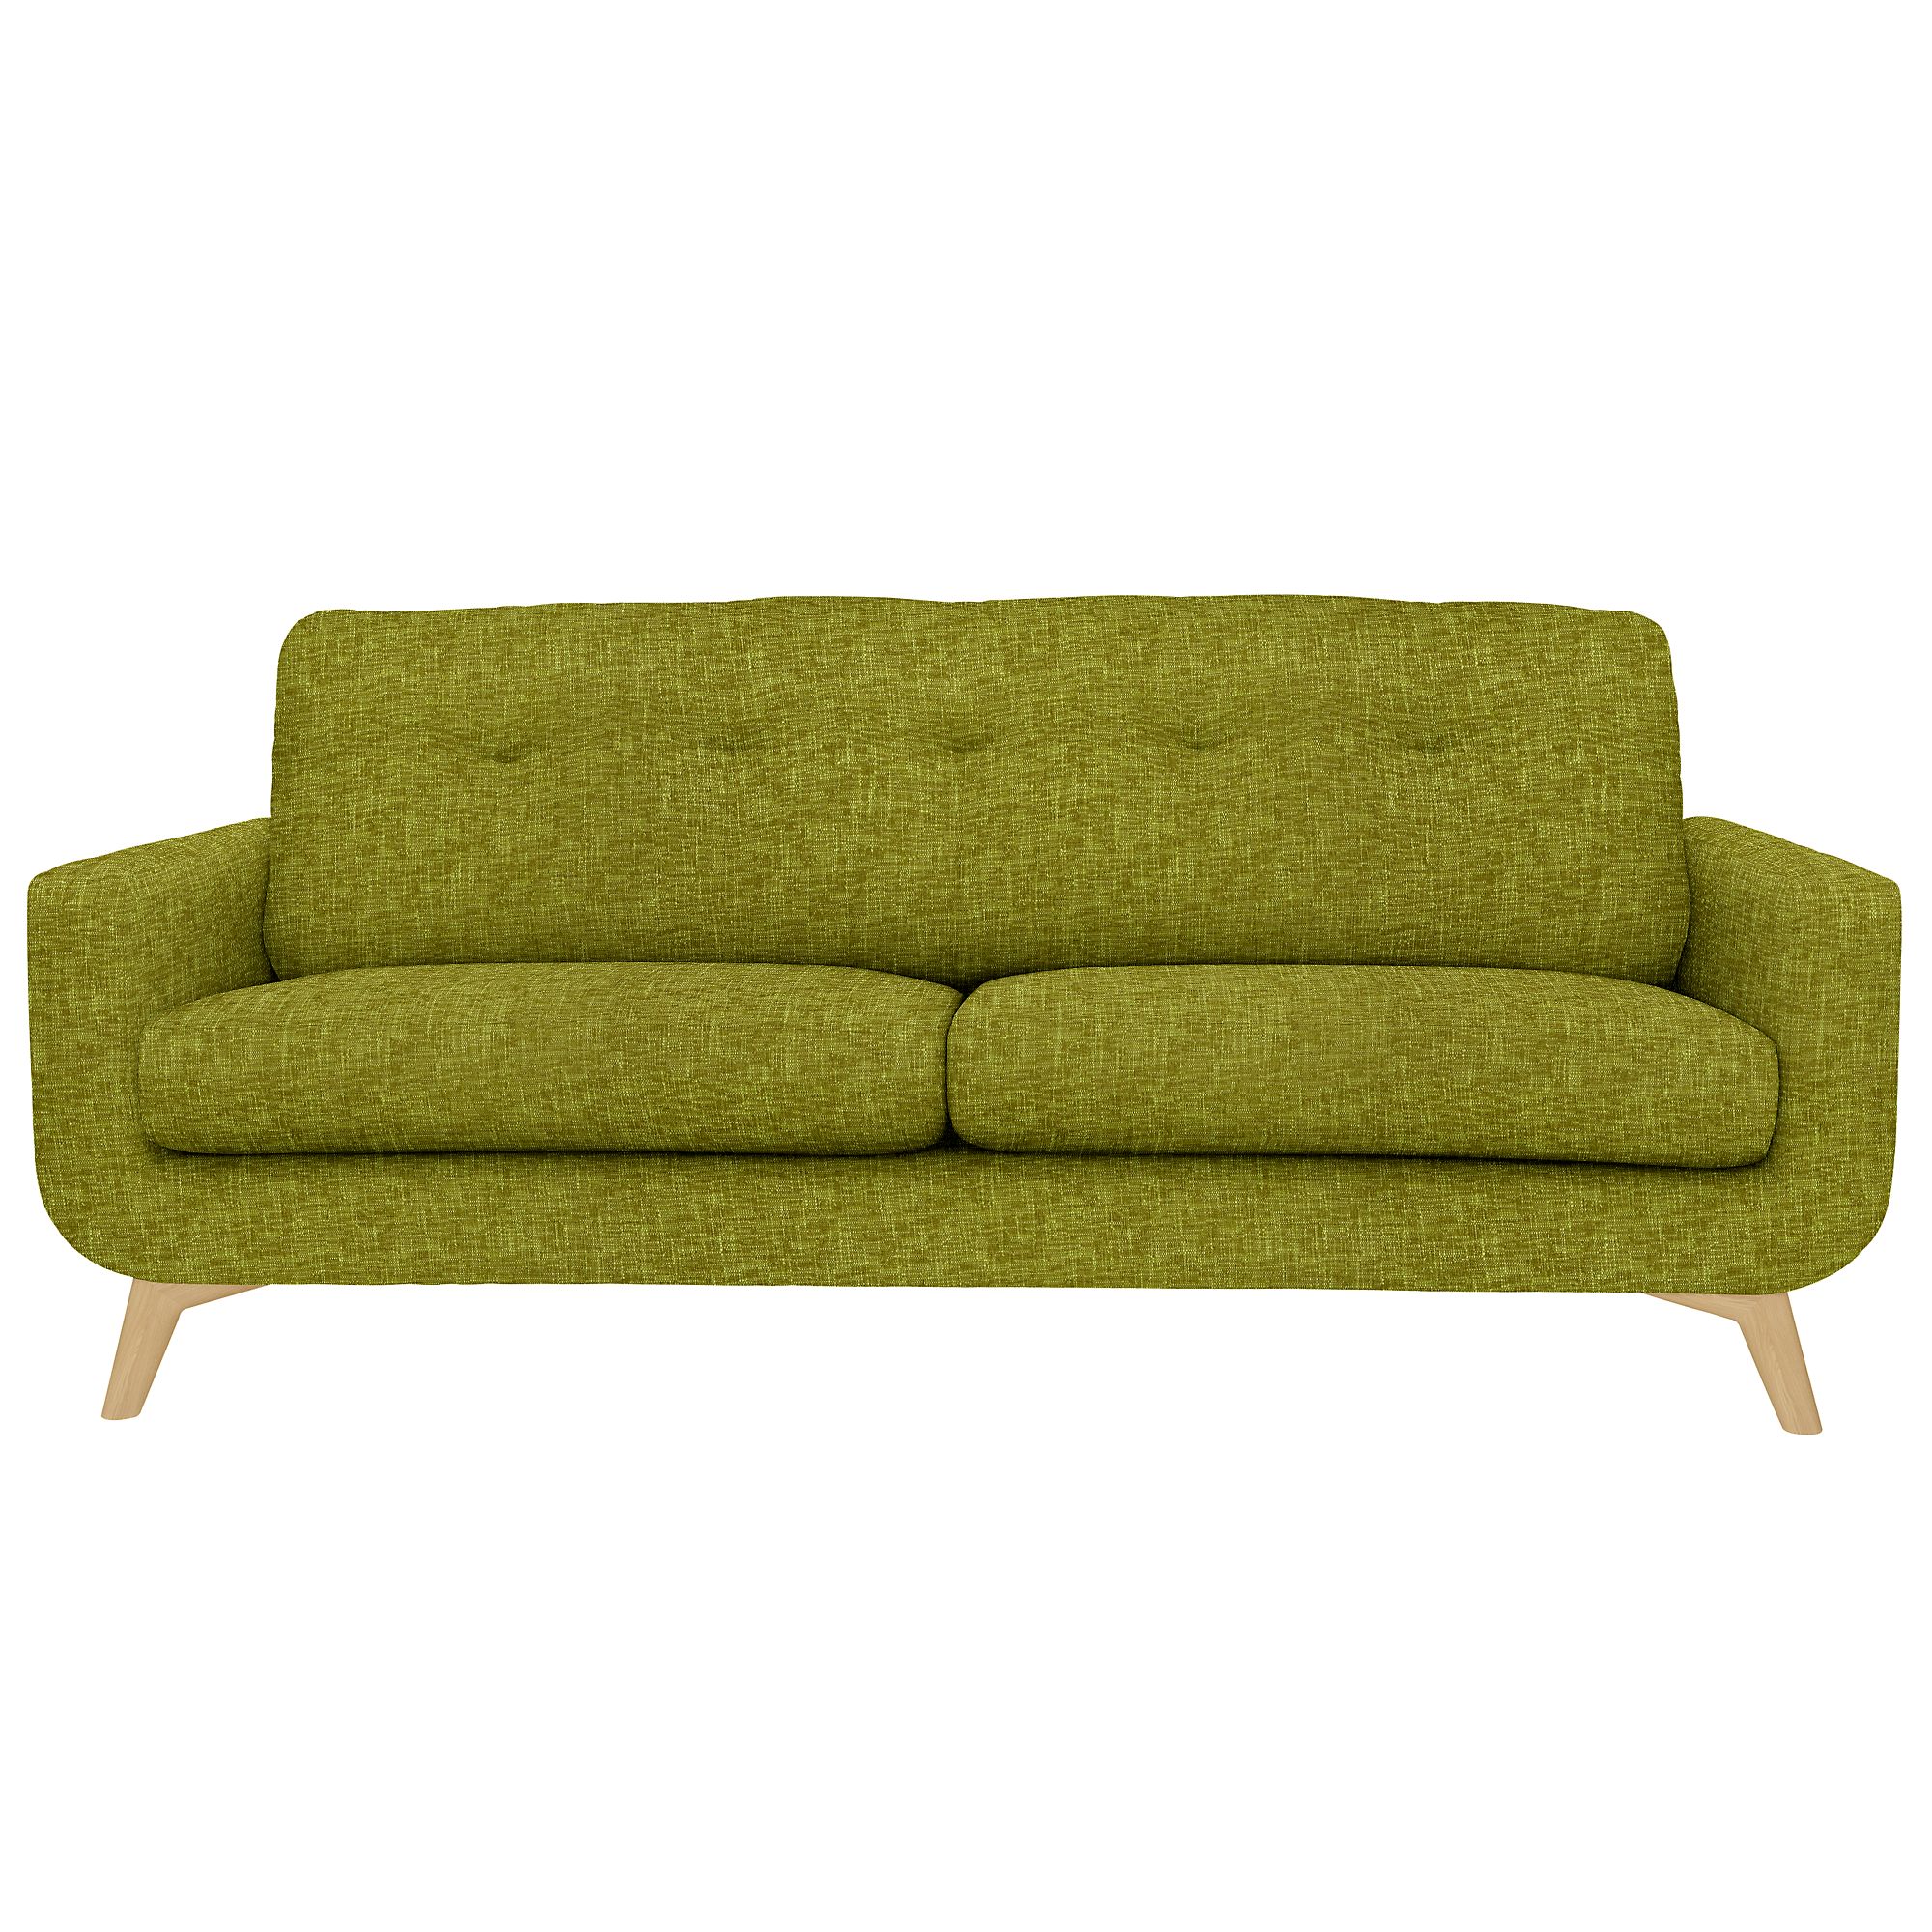 Barbican Large Sofa with Light Legs,